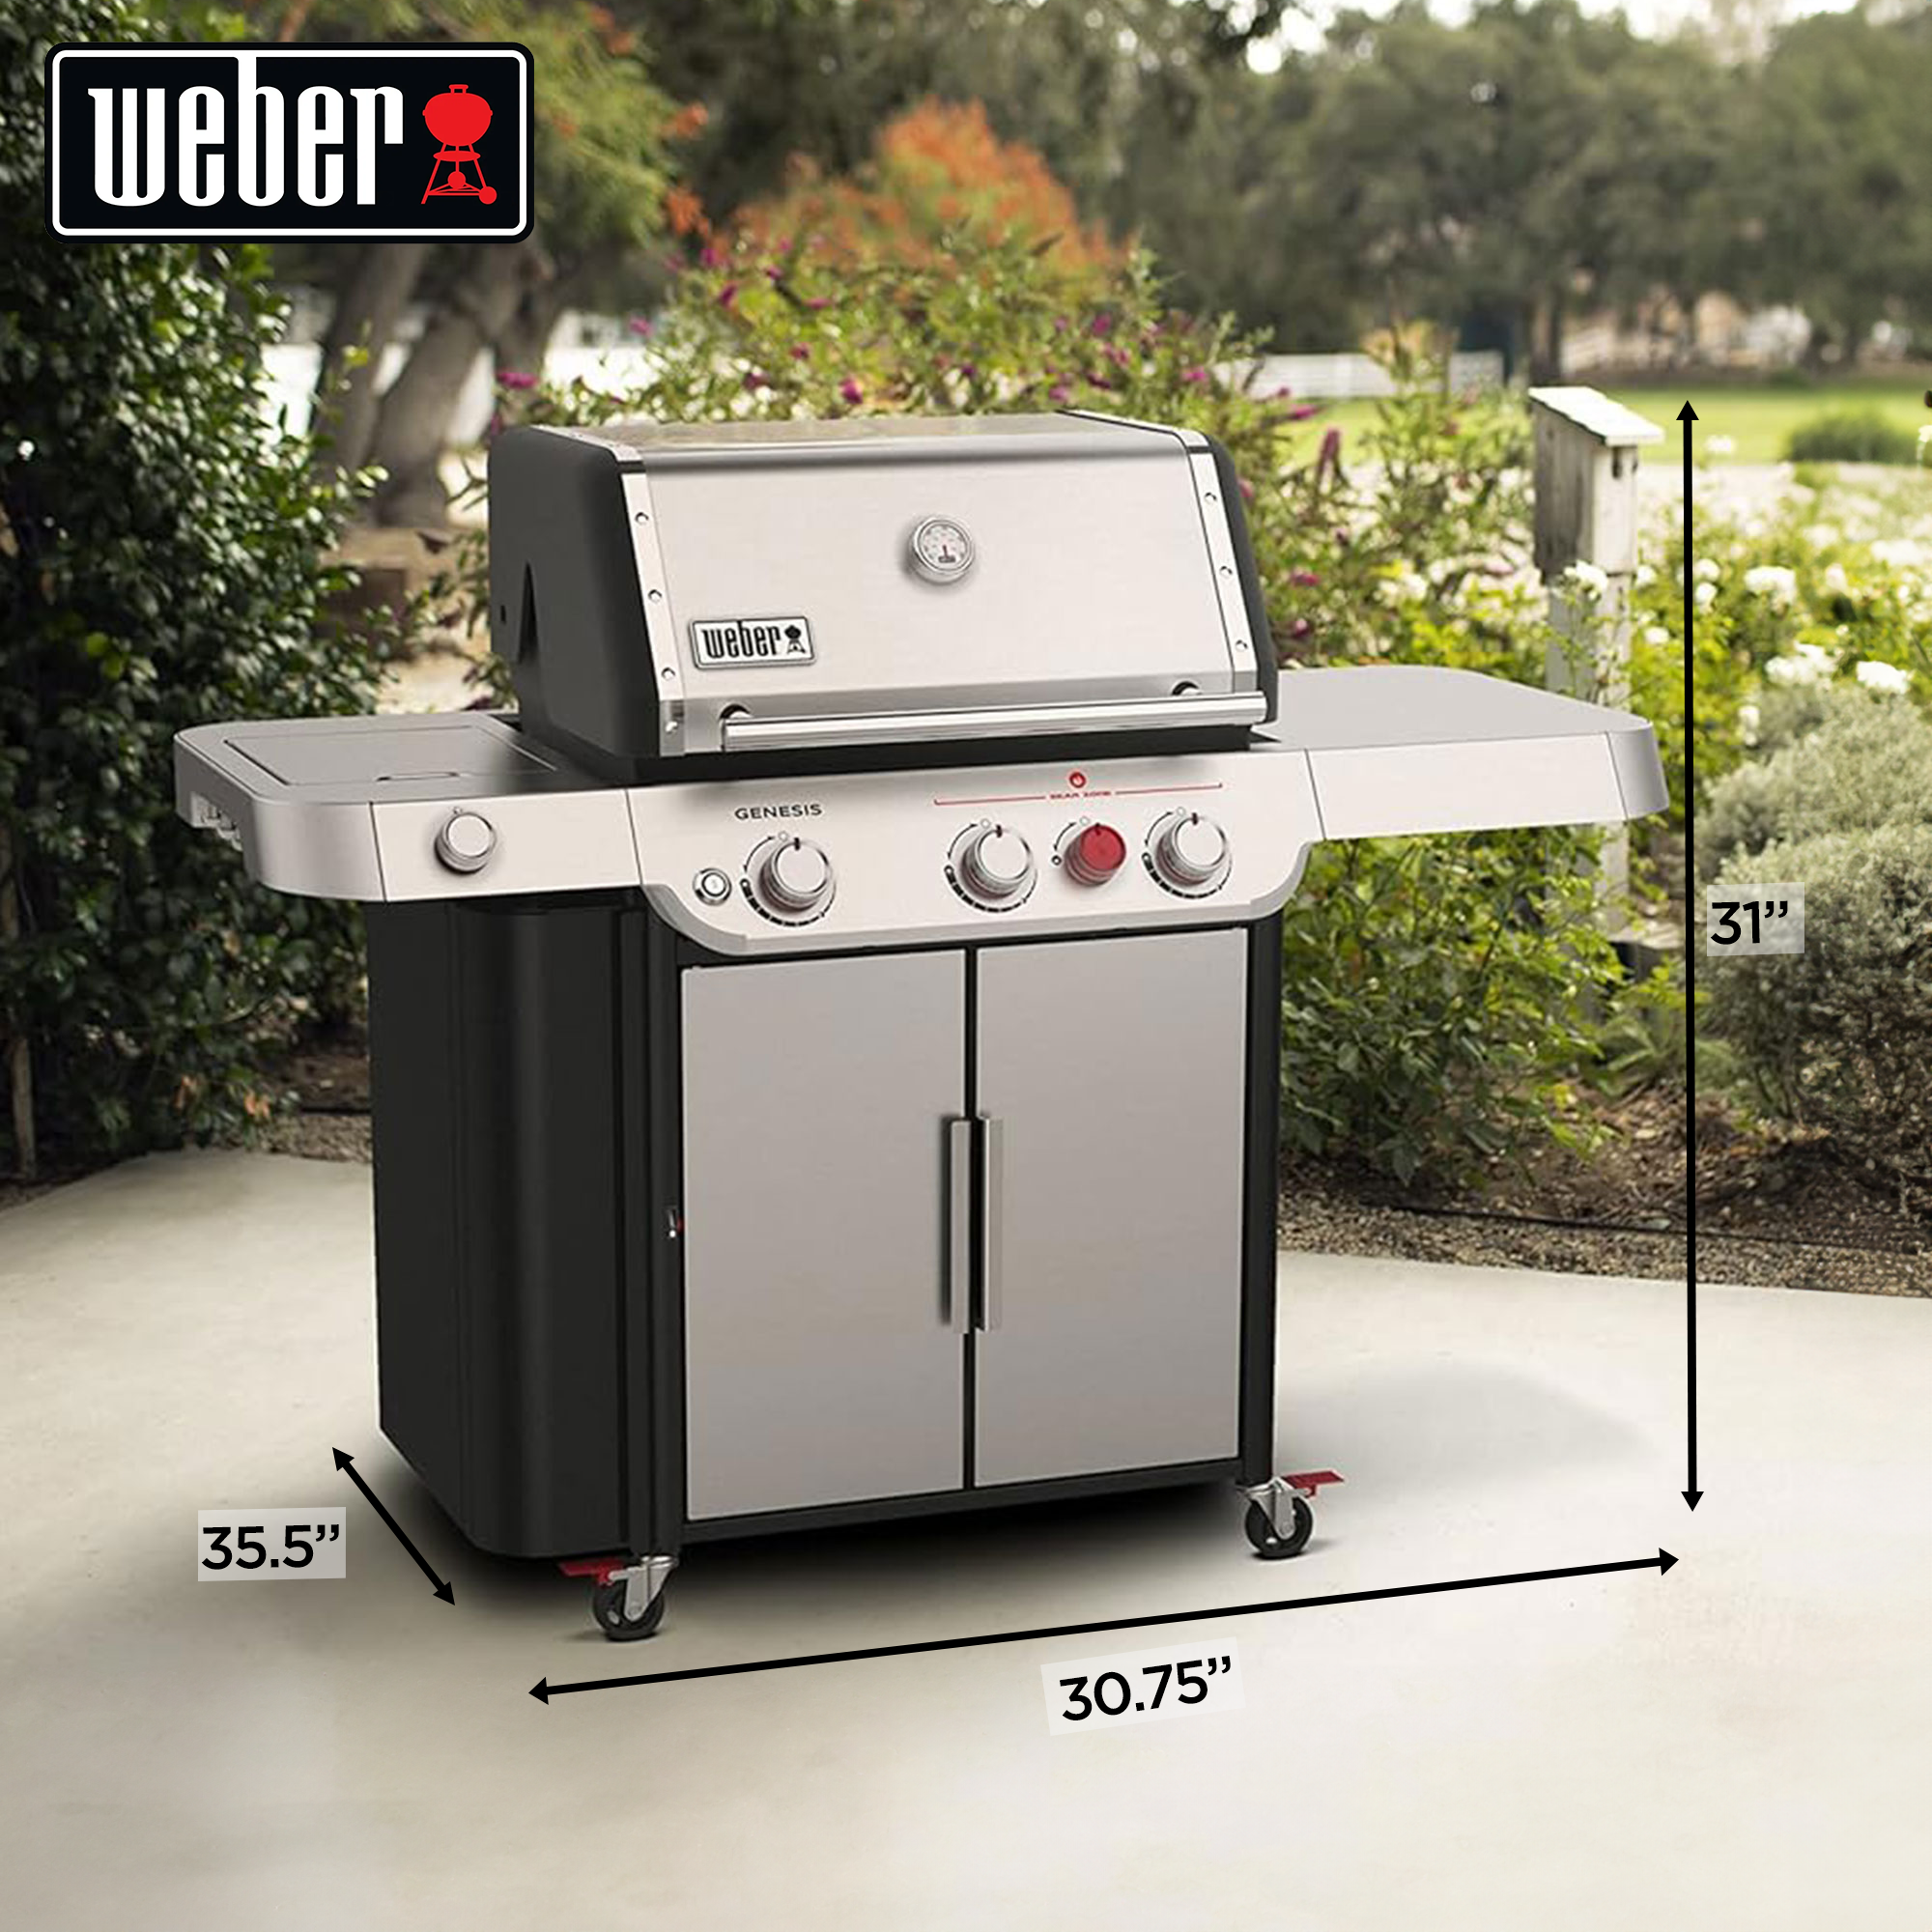 Weber Genesis S-335 Stainless Steel 3 Burner Natural Gas Grill, Silver - image 3 of 9